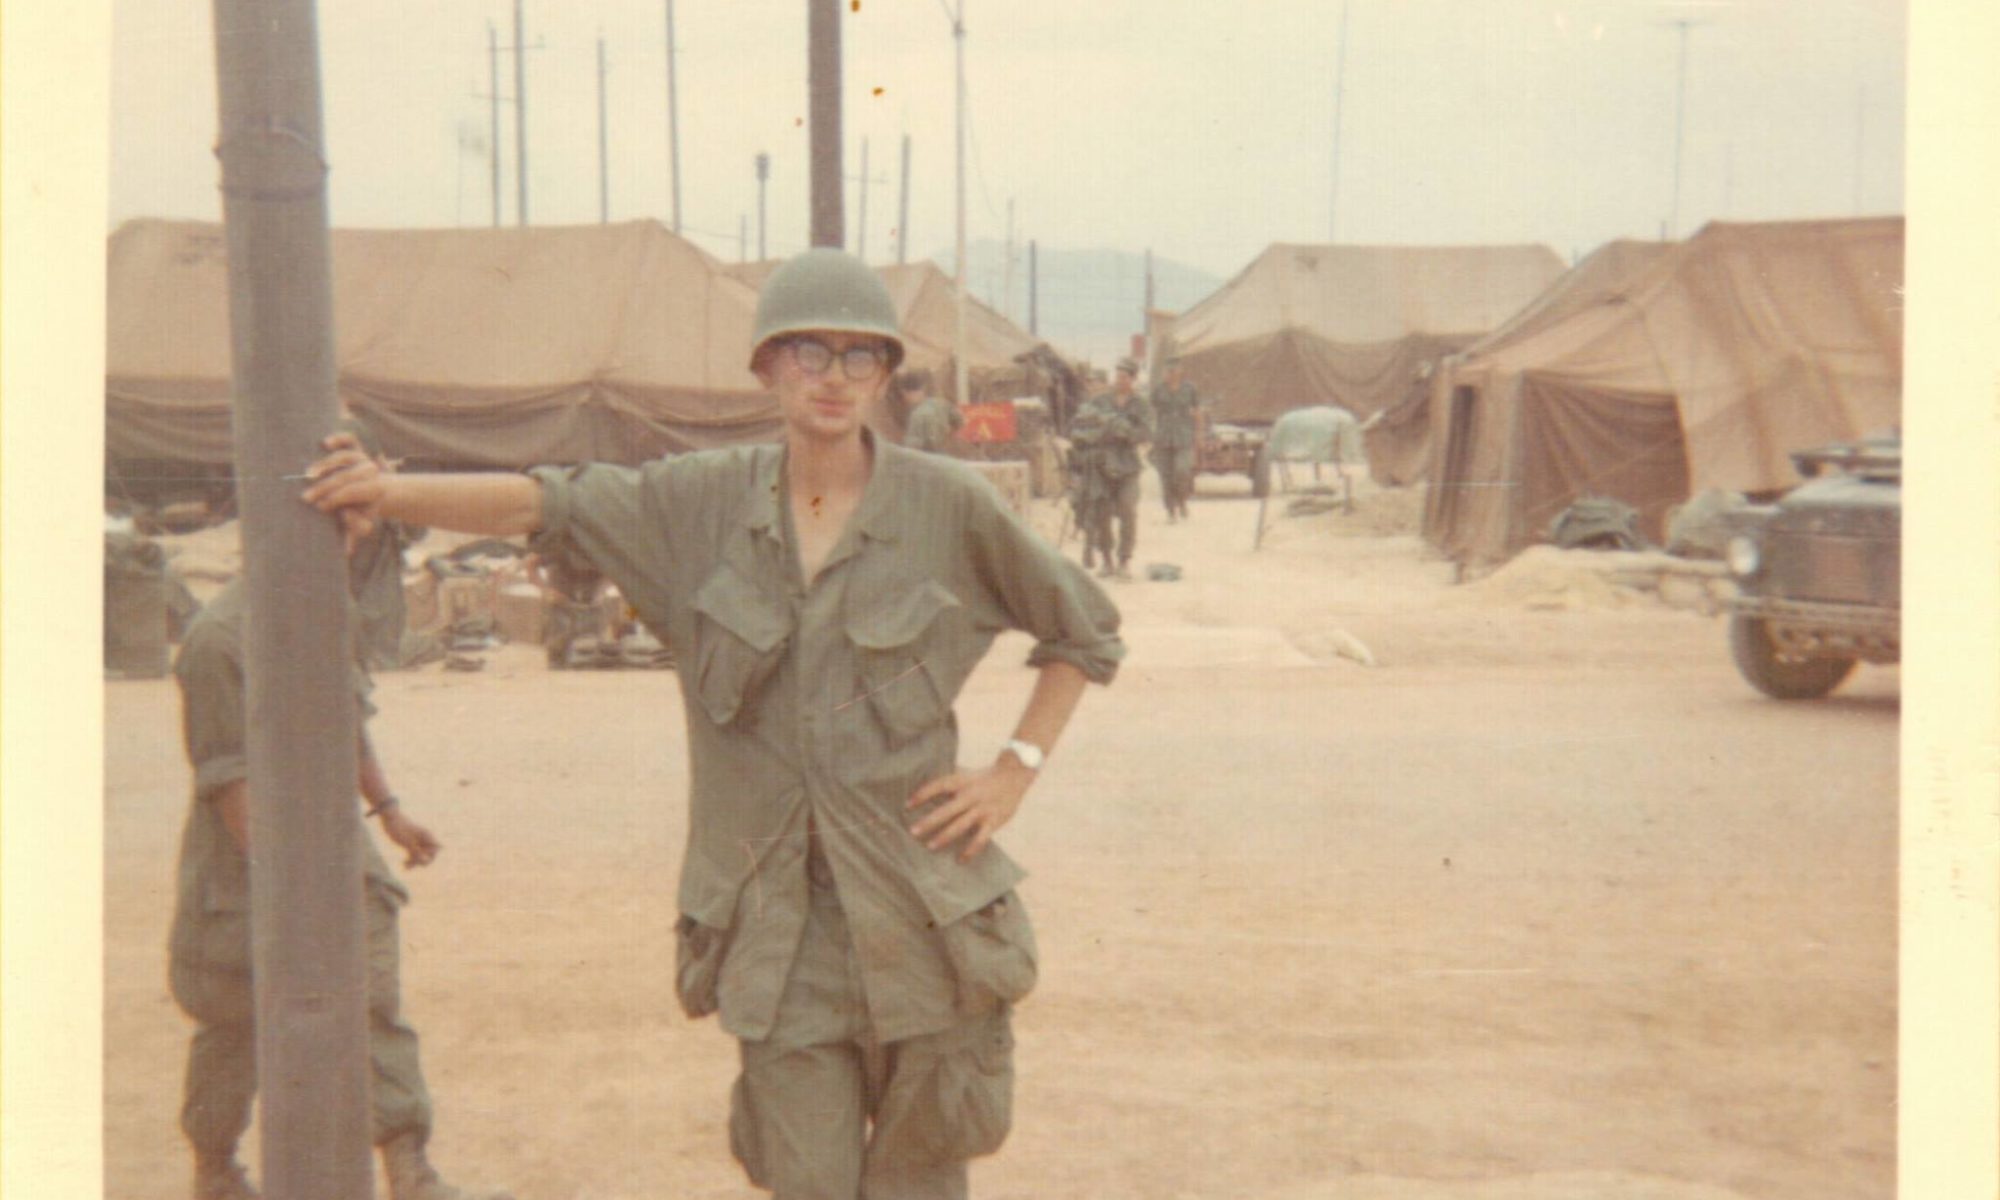 Image of Marine Cpl Roger Hill some where in Vietnam in 1968